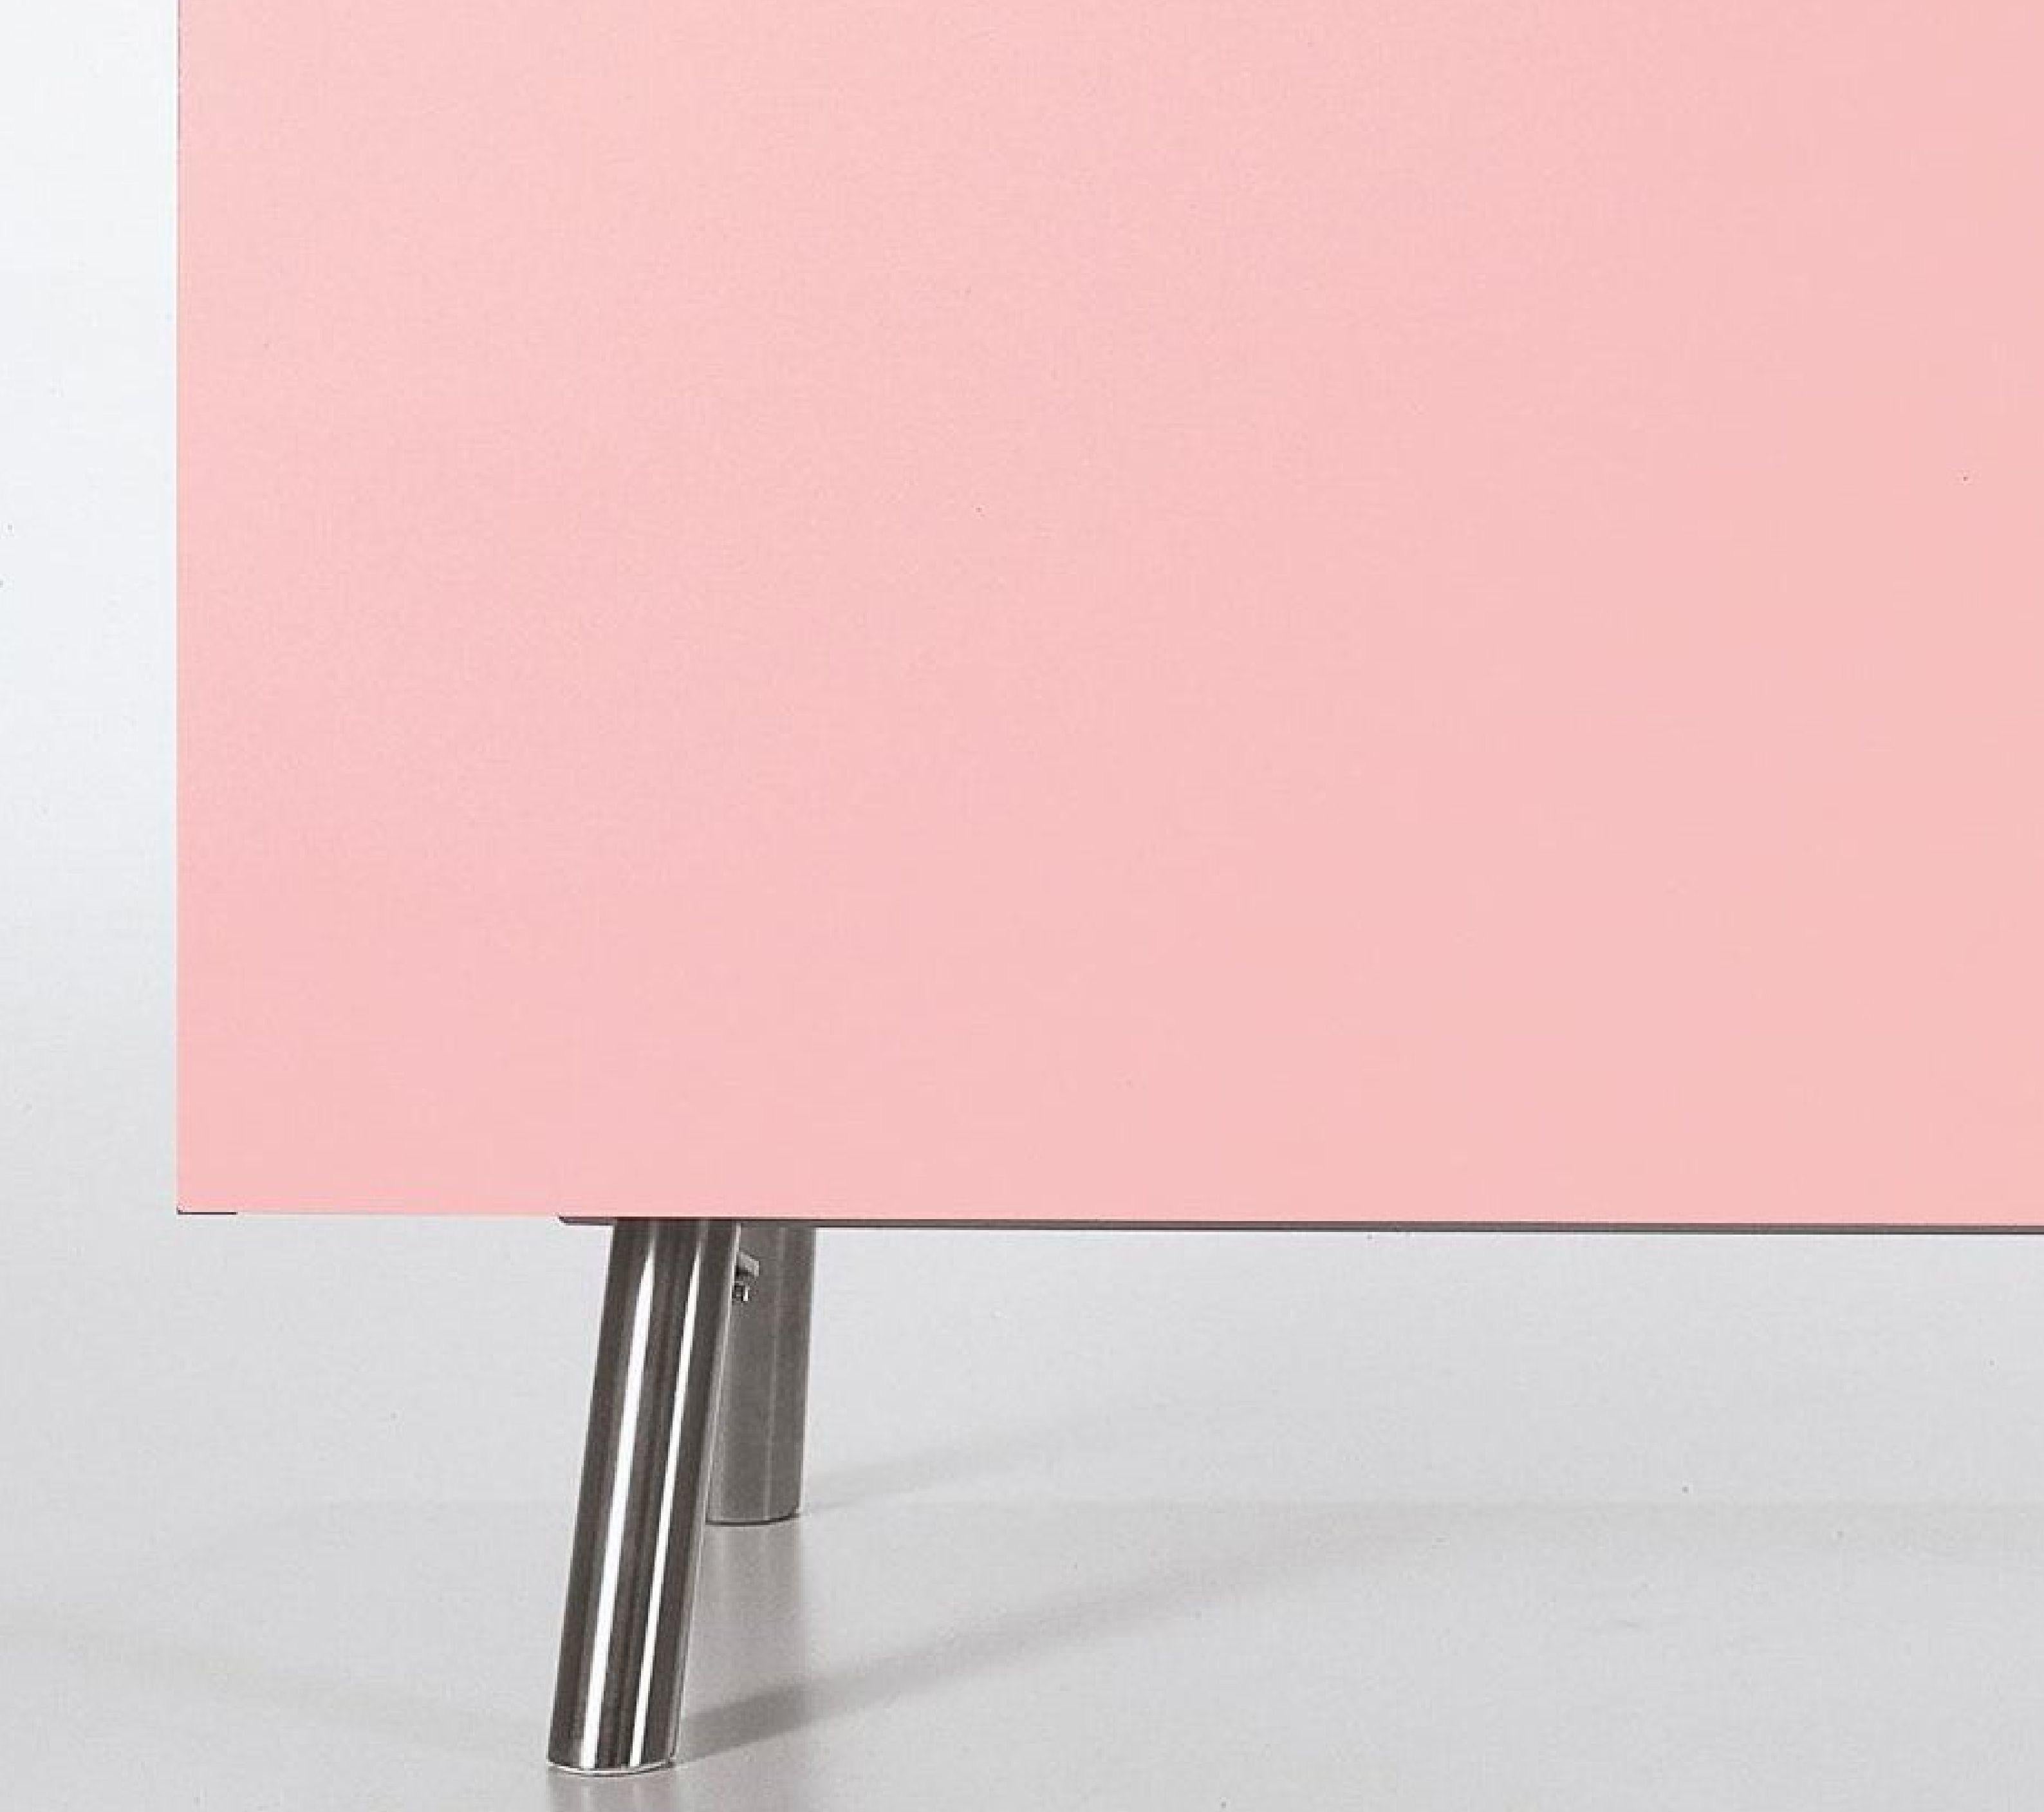 Maarten van Severen for Vitra pink, green, yellow kast three-high storage unit. 

A key theme in the oeuvre of Maarten van Severen is storage furniture, be it shelves, cupboards or sideboards. The design for Kast, which Van Severen worked on